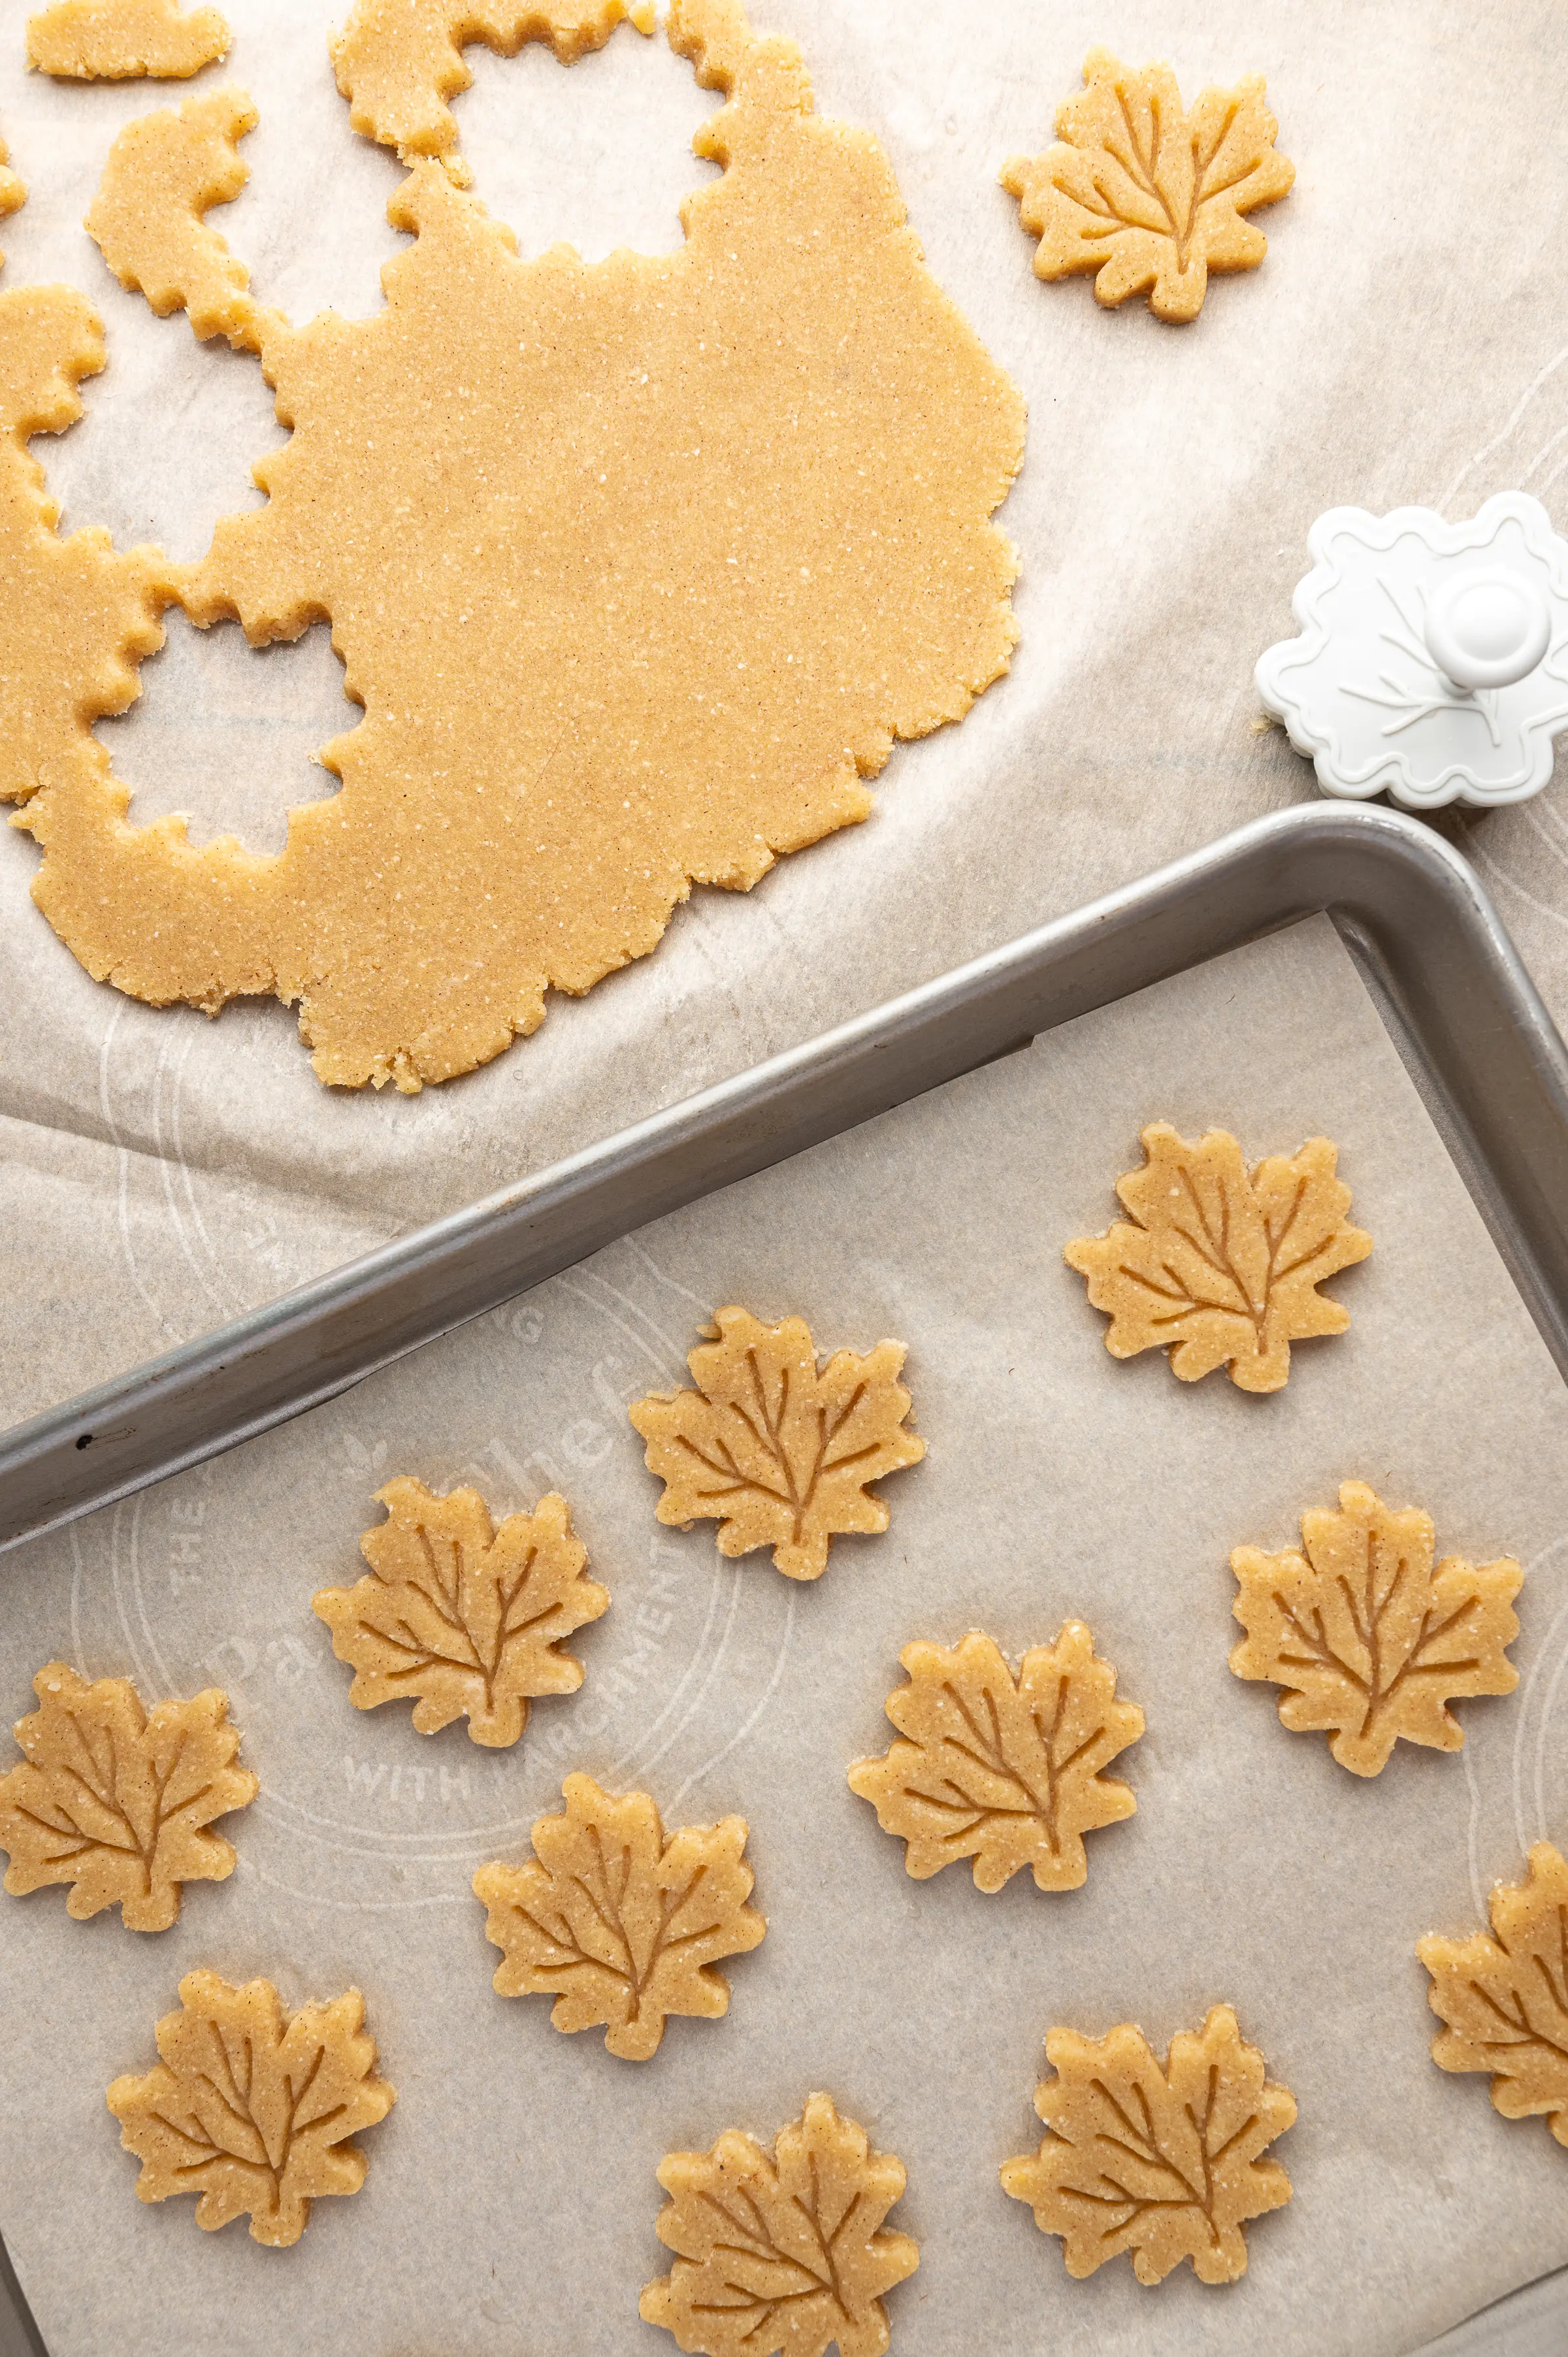 Cookie tray of unbaked sugar free maple leaf shaped pie decorations